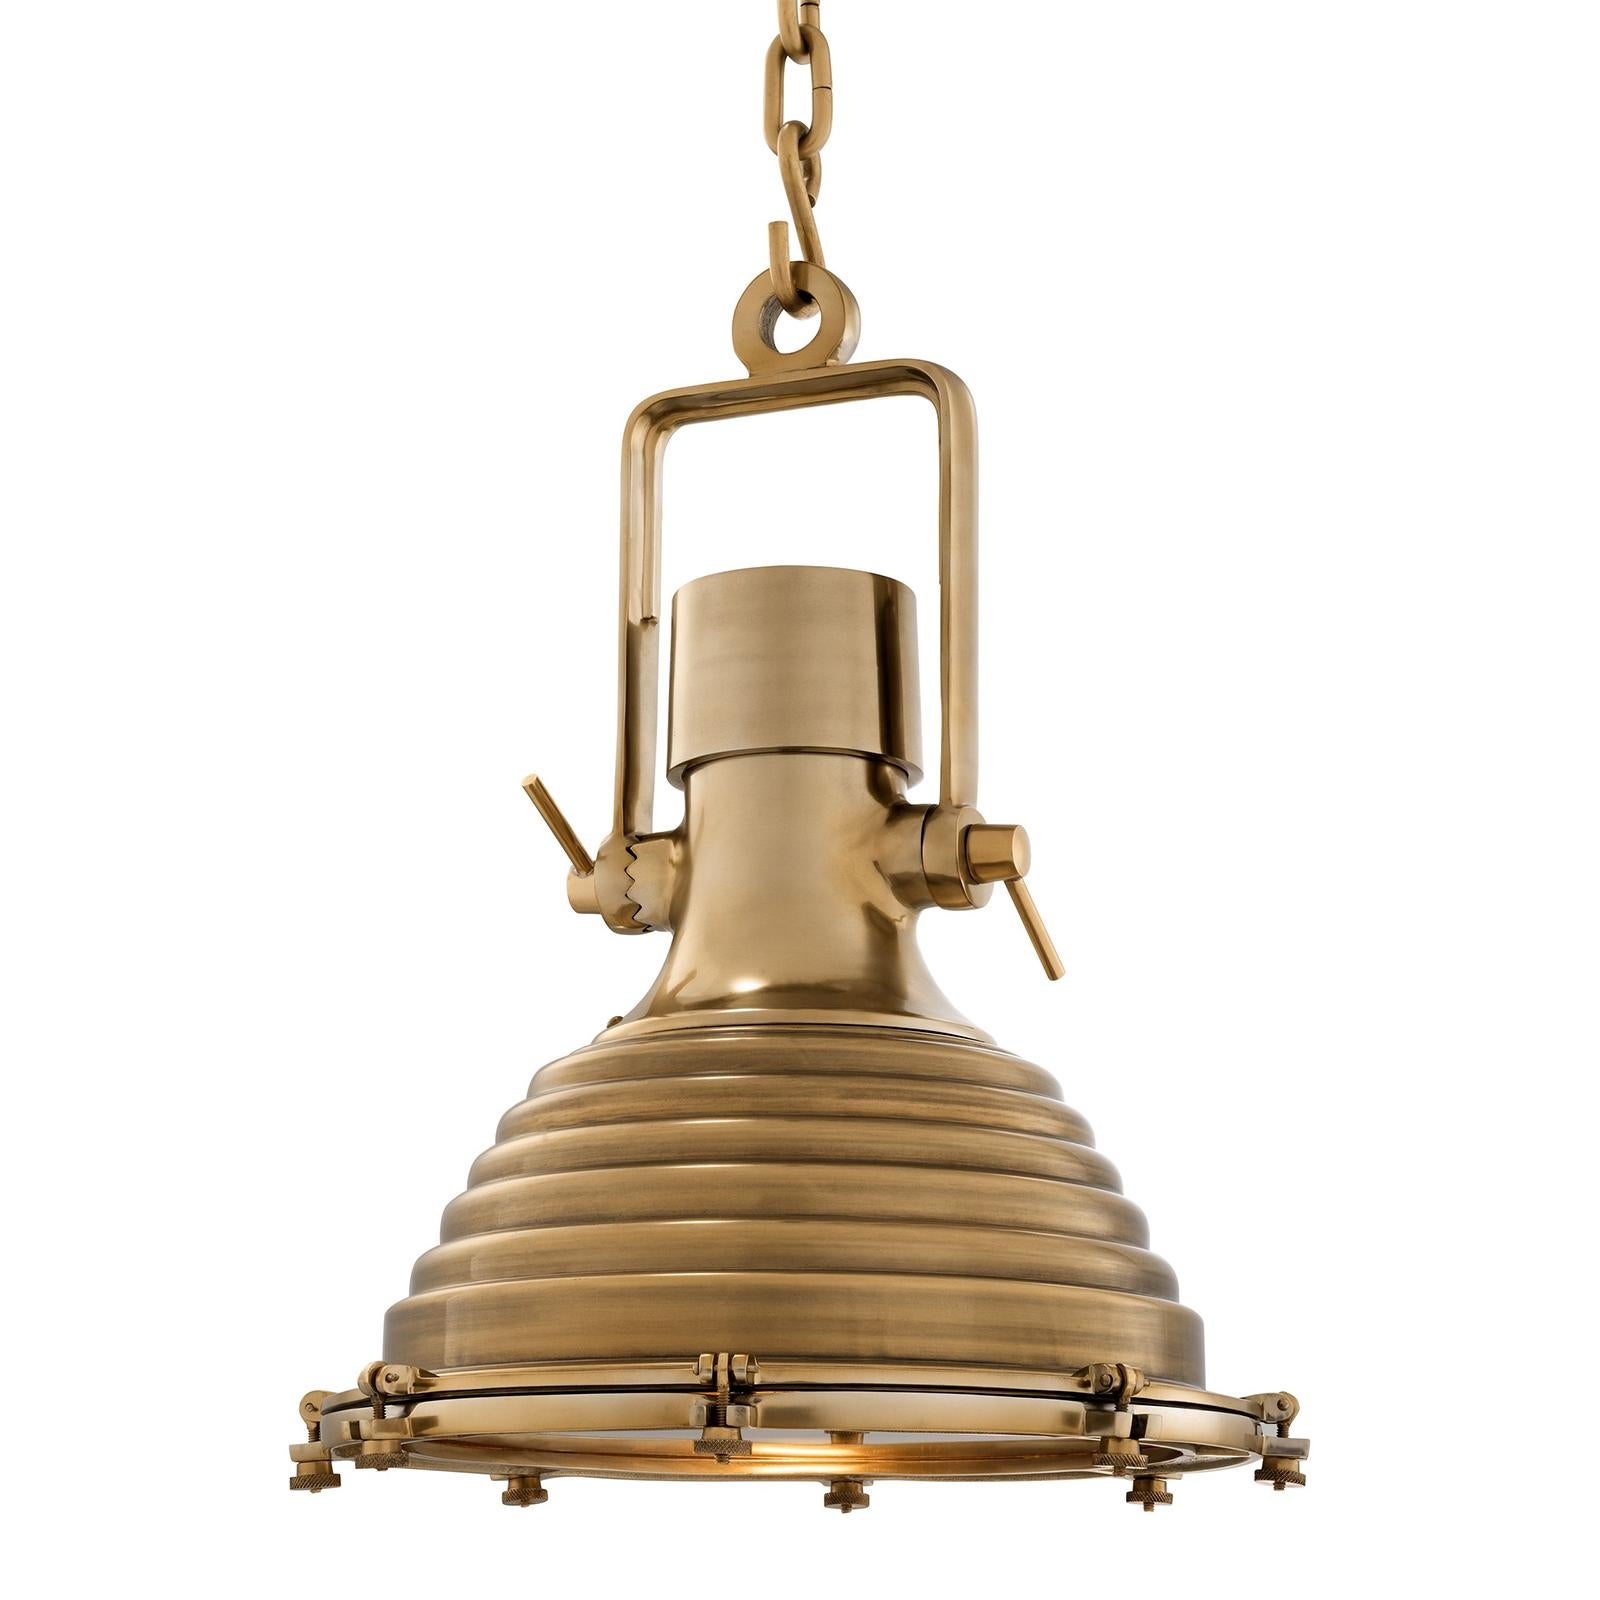 Suspension yachting large in solid brass
in vintage finish. With clear glass. 1 bulb,
lamp holder type E27, max 40 watt. Bulb
not included. with 150cm adjustable chain.
Also available in polished aluminium.